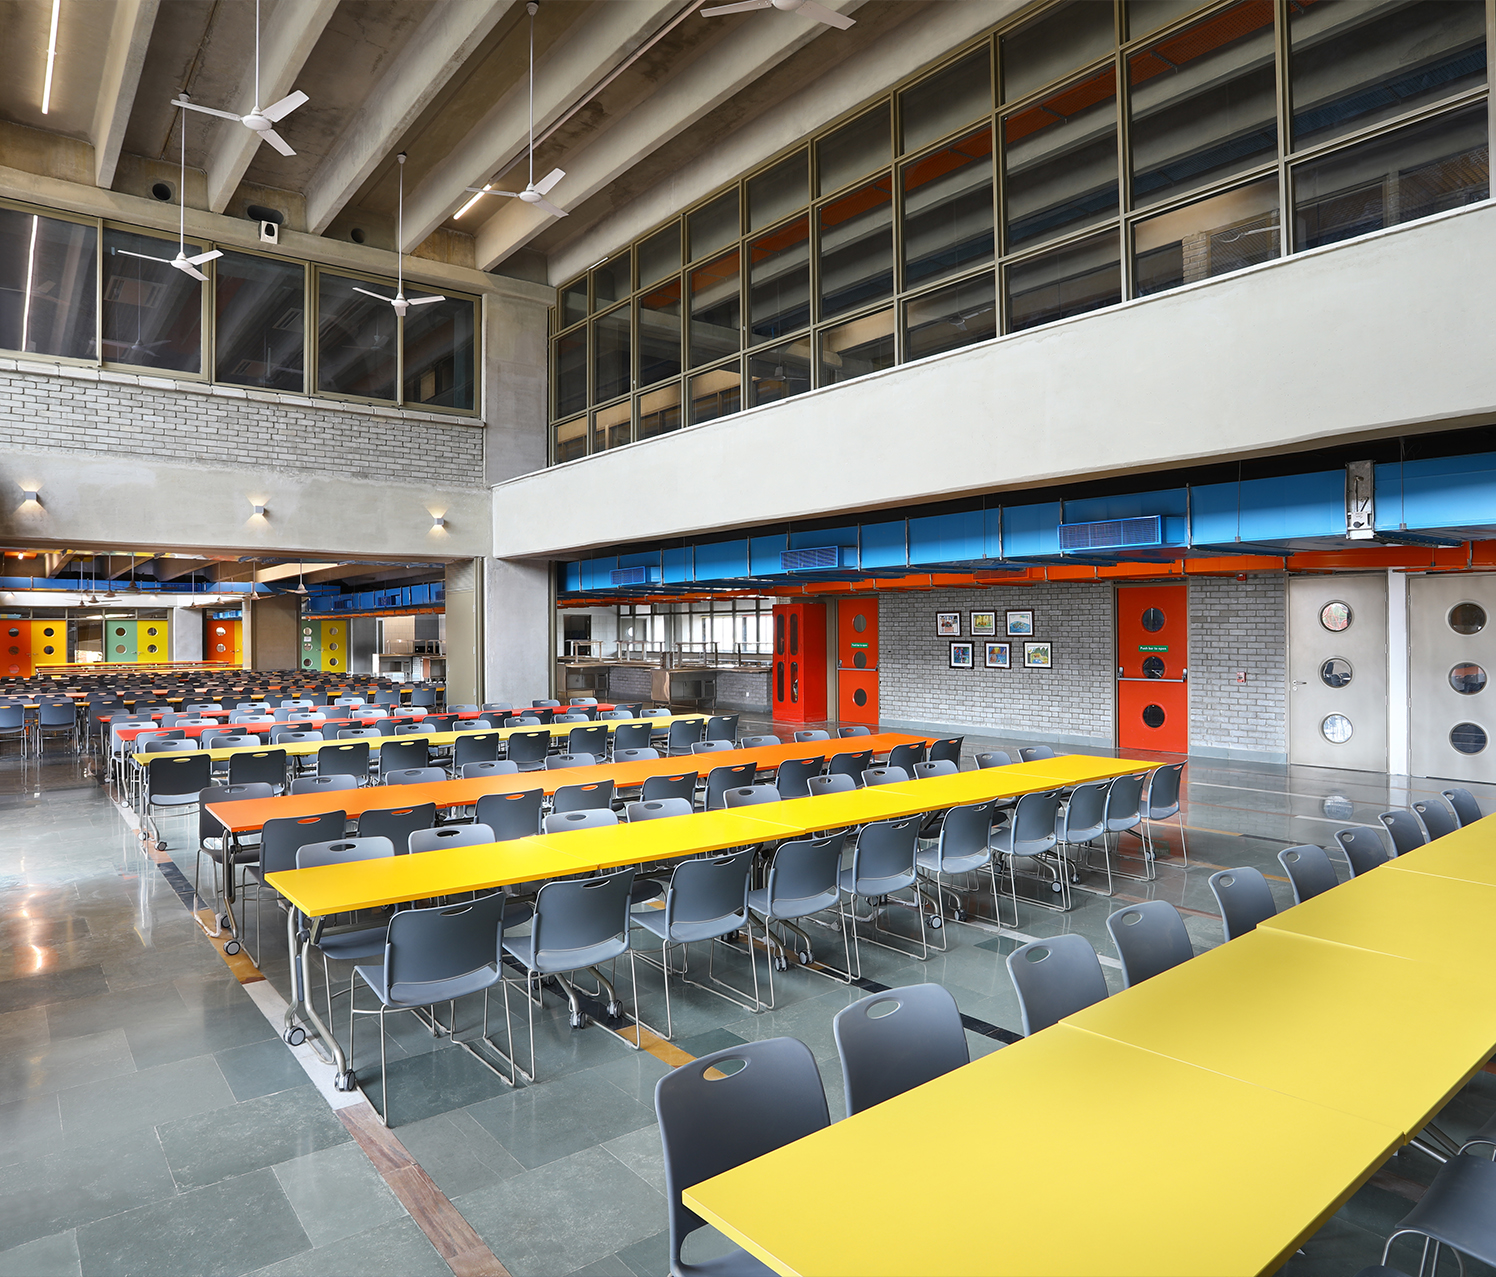 Institutional interior design projects by Brawn Globus